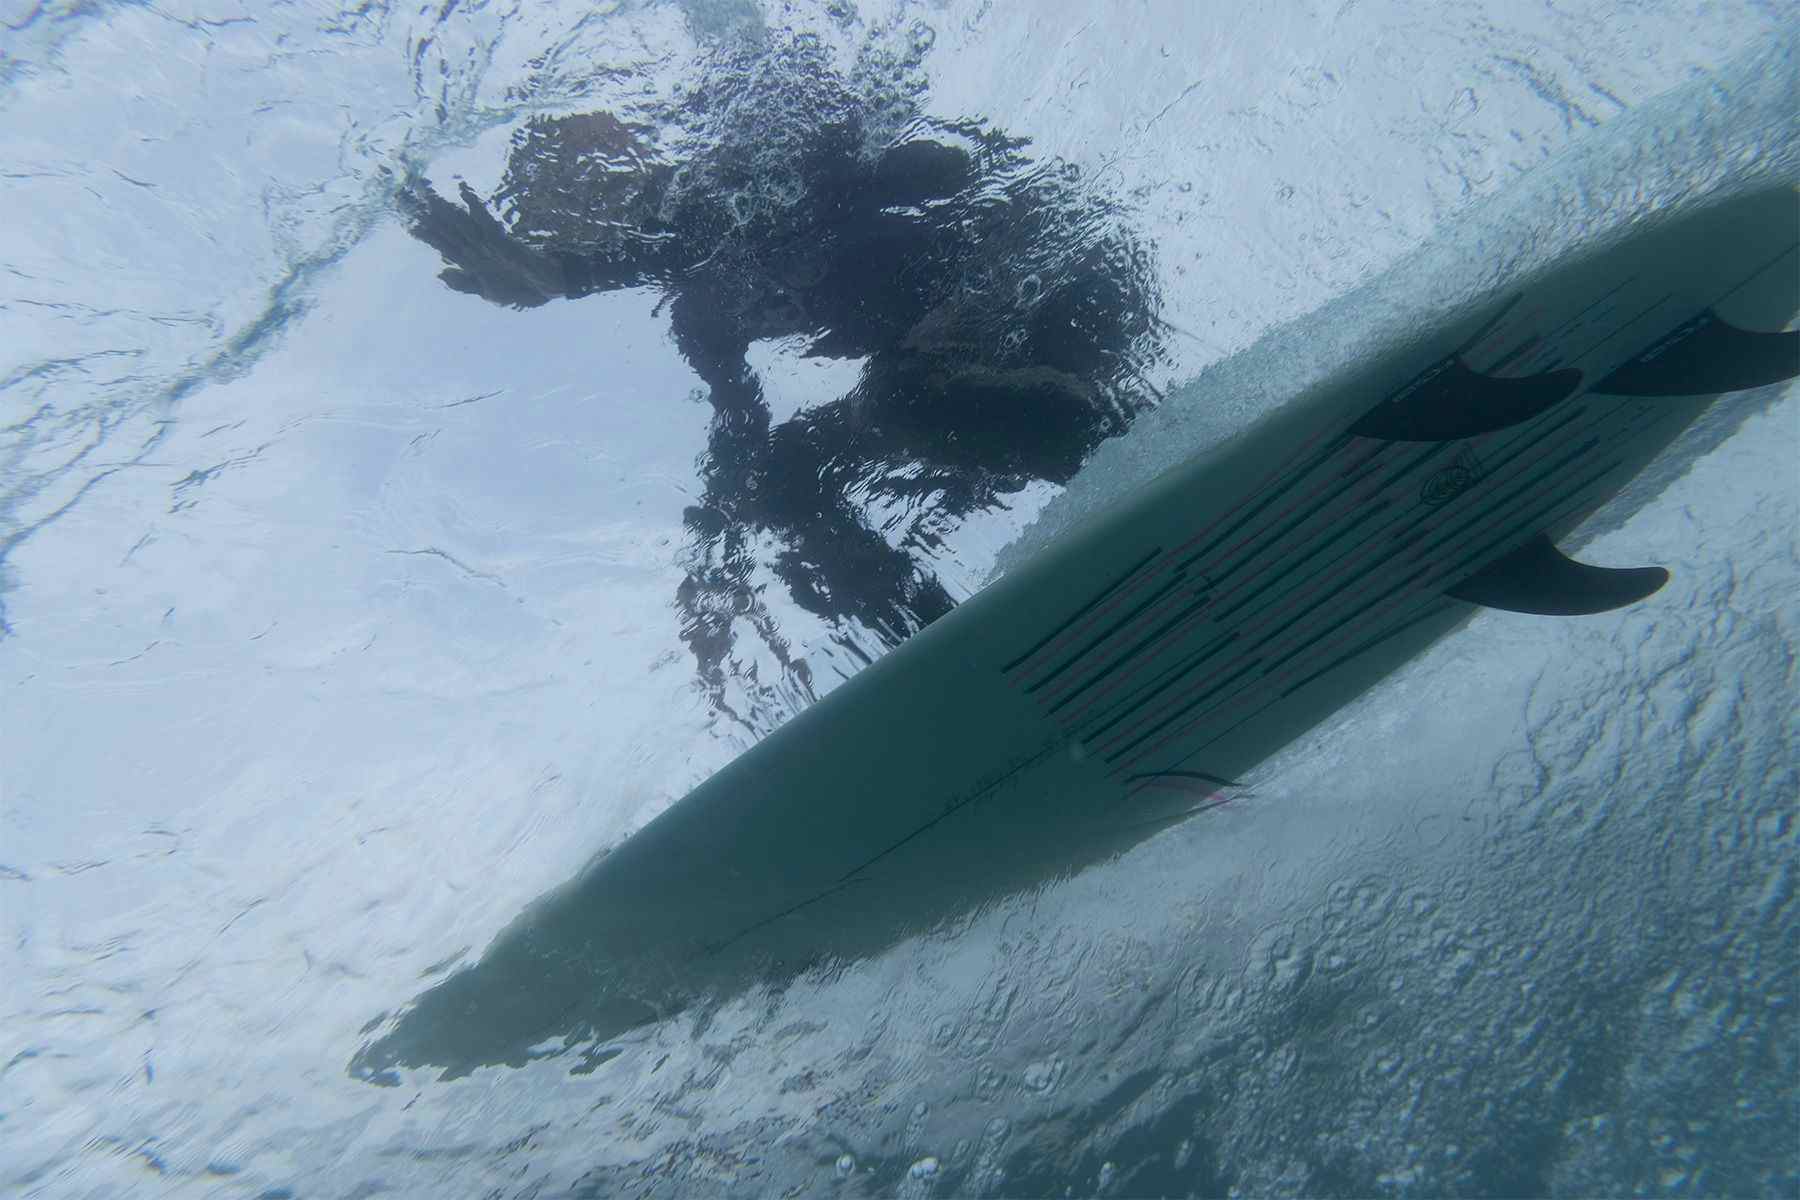 underwater view of a surfer going along a wave with tell tale ribbons on the bottom of his surfboard